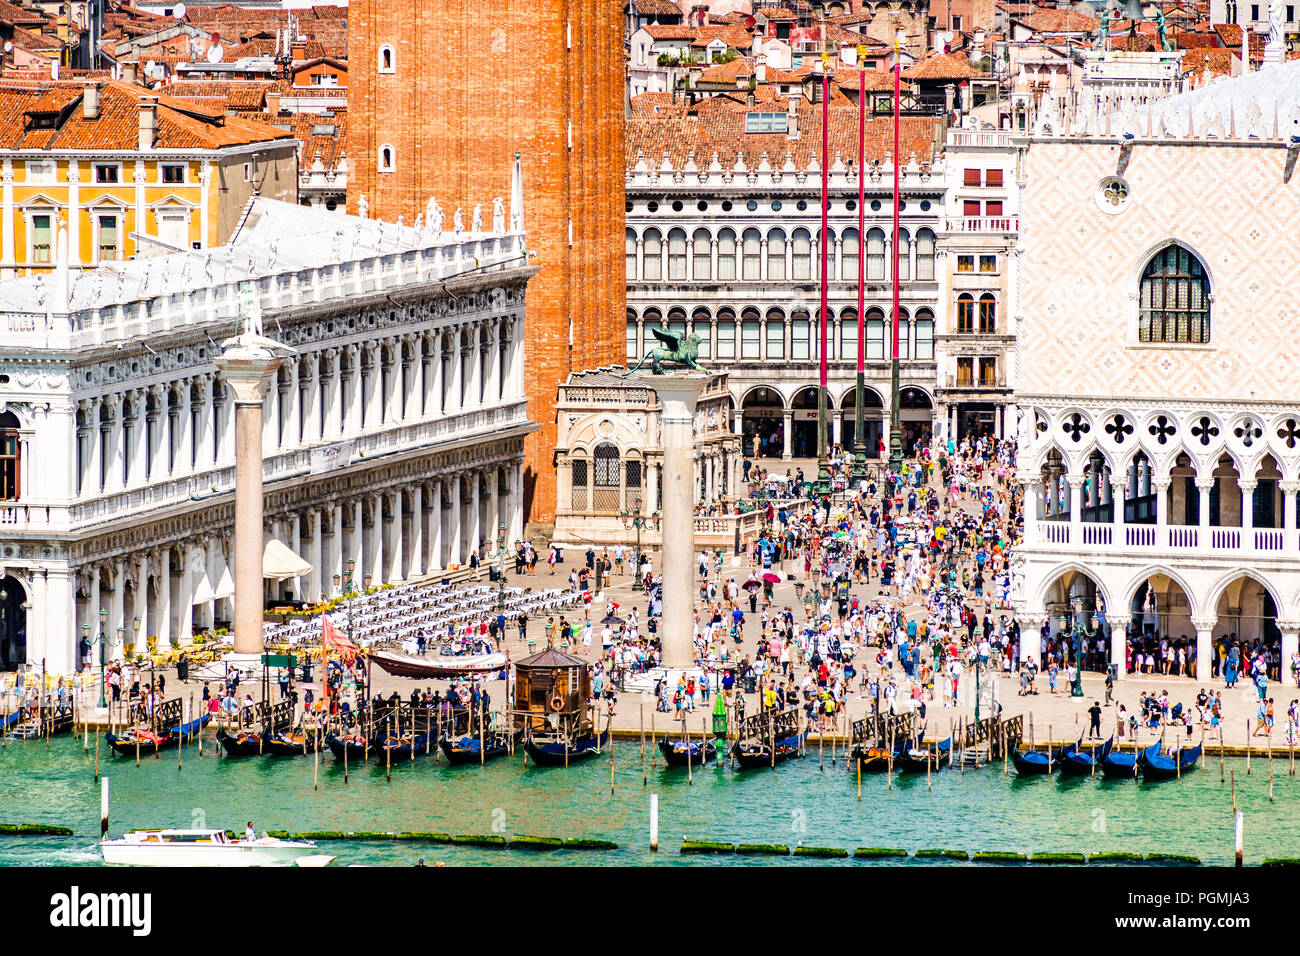 St Marks Square (Piazzetta di San Marco) opens onto the Grand Canal in Venice, Italy. In summer this area is filled with tourists. Stock Photo